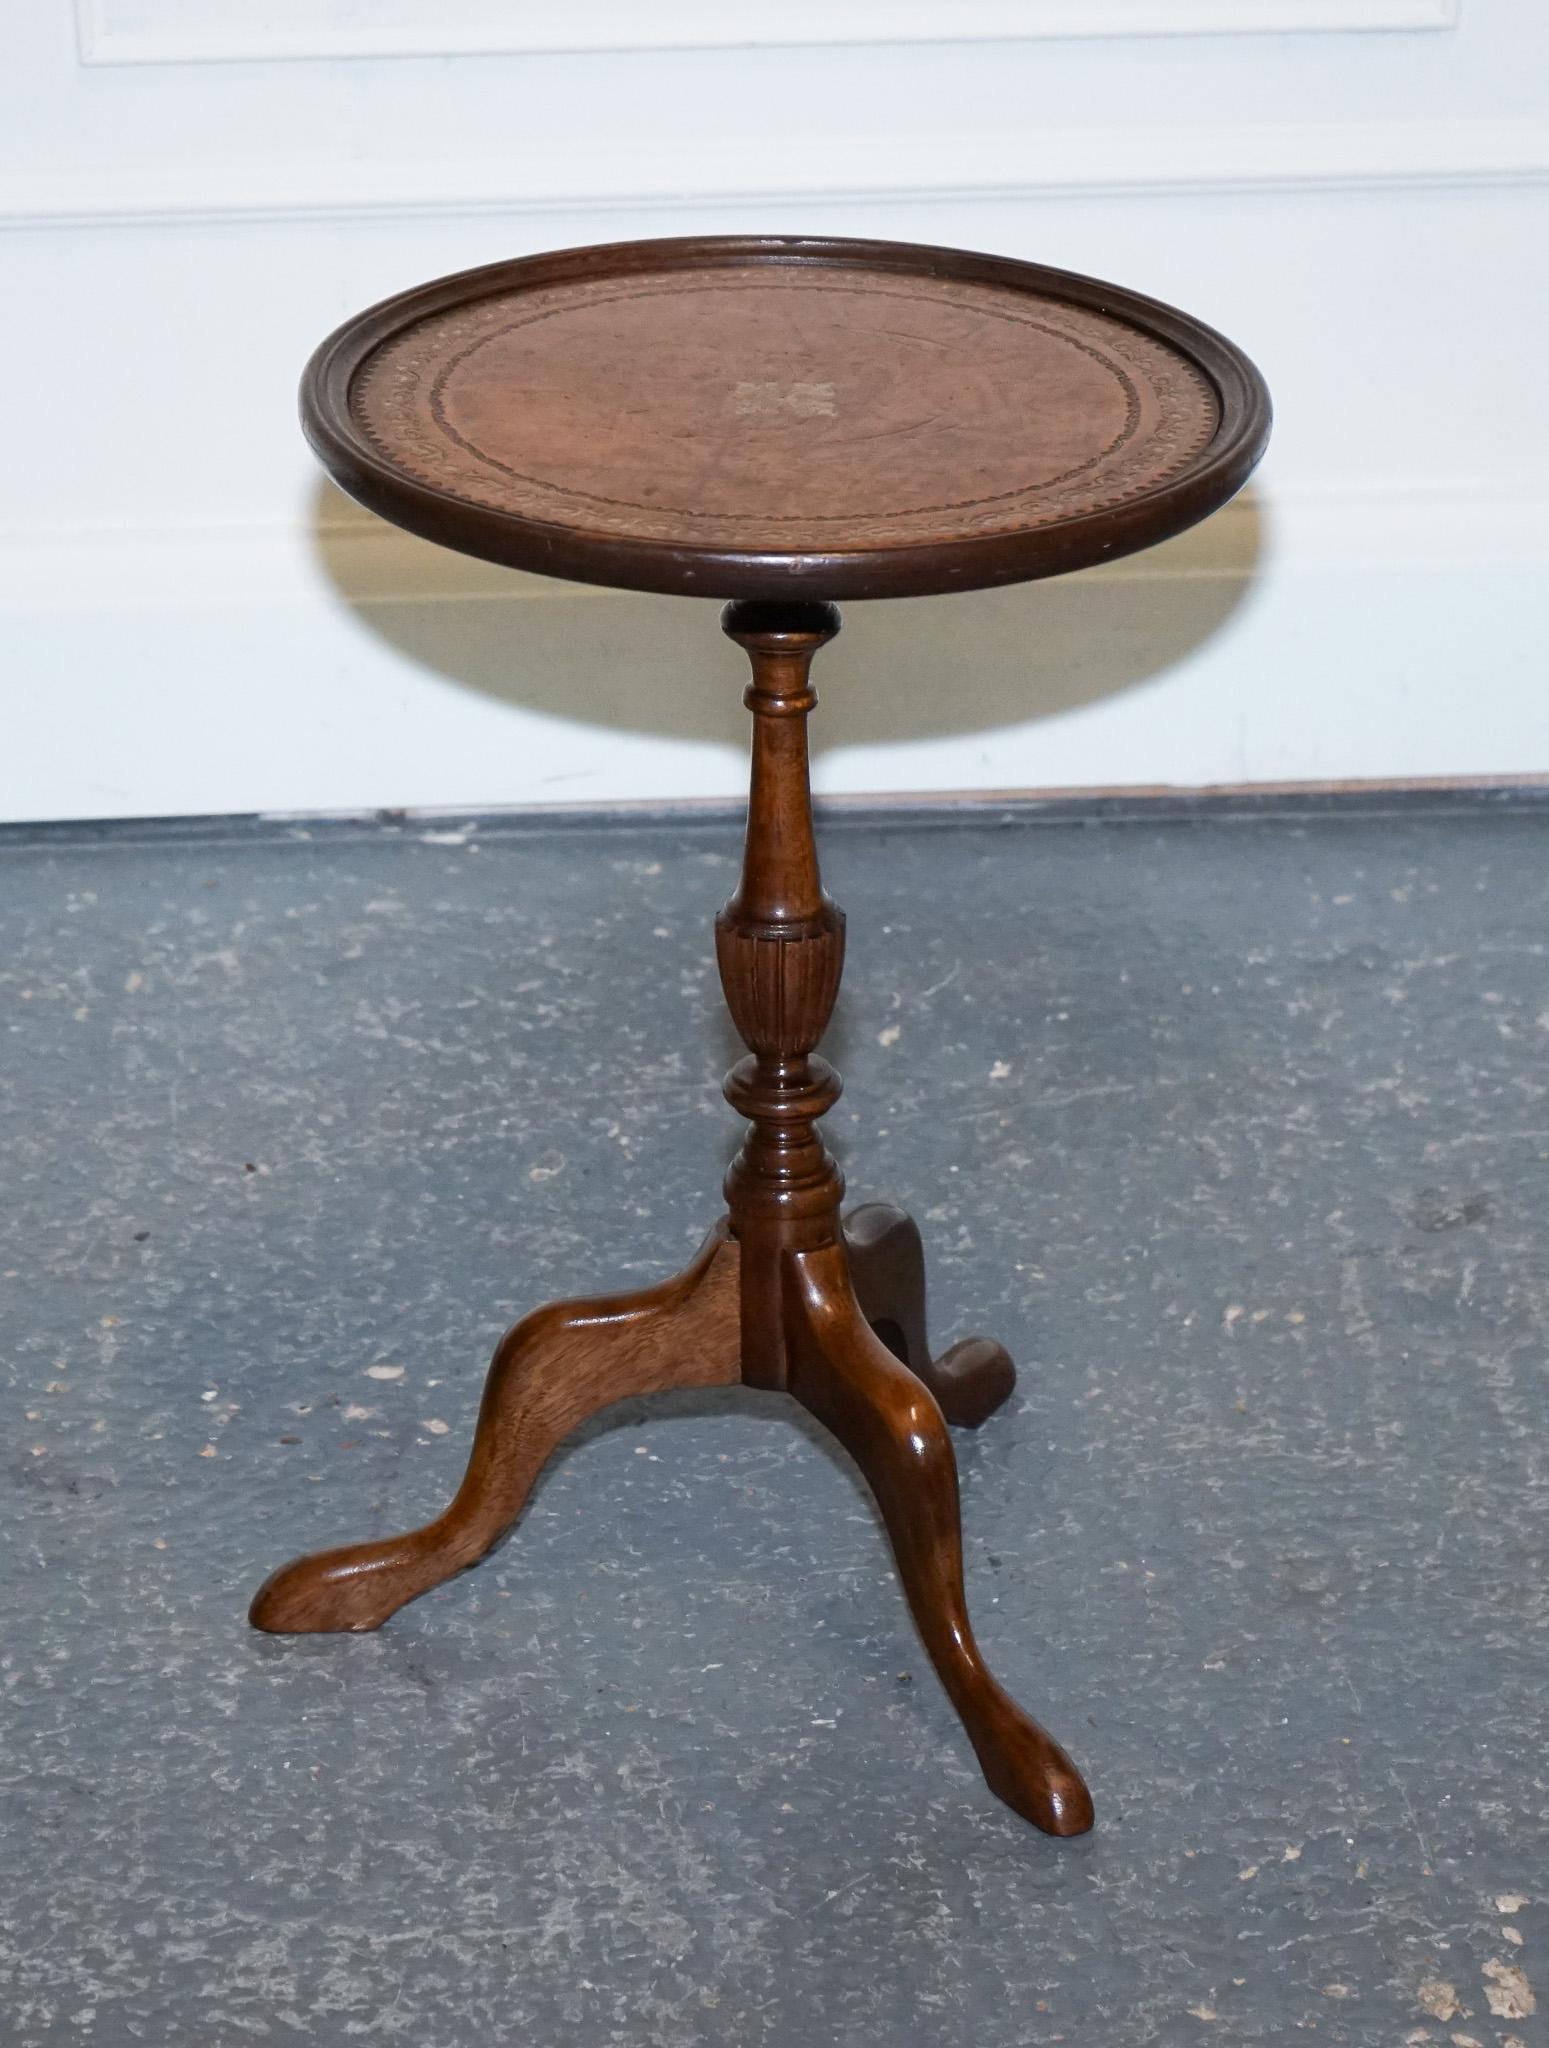 
We are delighted to offer for sale this Lovely Antique Victorian Brown Leather Top Tripod Side End Lamp Table.

A lovely antique brown hardwood side end plant table with a brown leather top exudes an air of vintage charm and timeless elegance. This